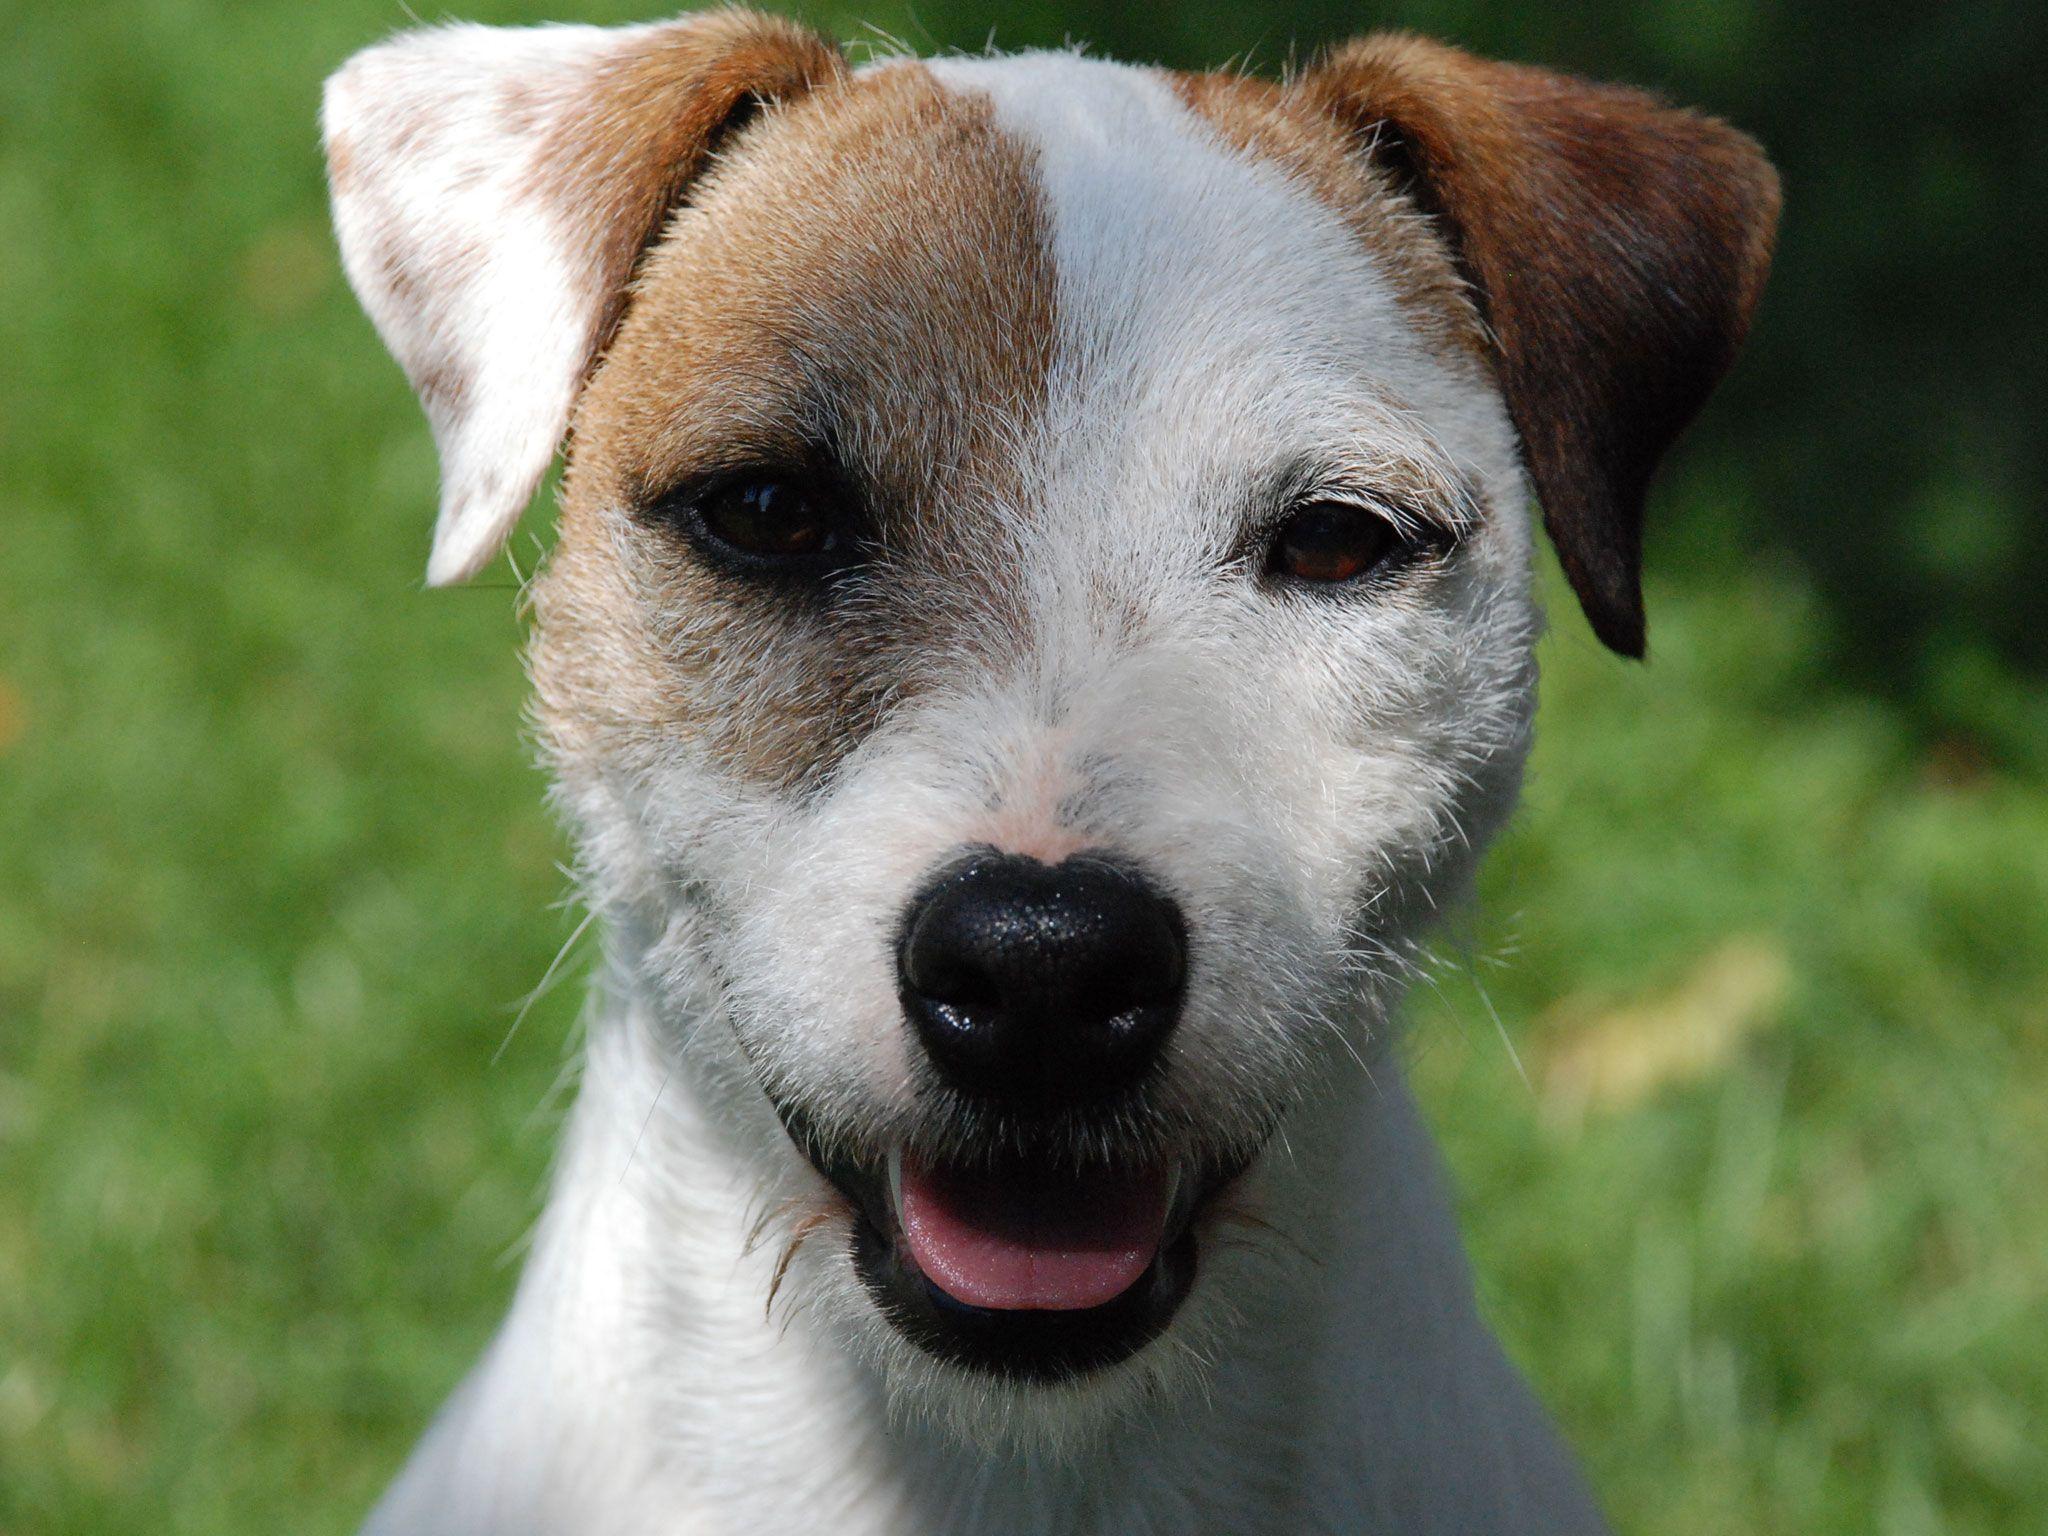 Jack Russell Terrier Wallpaper Image. Animal Planet HD